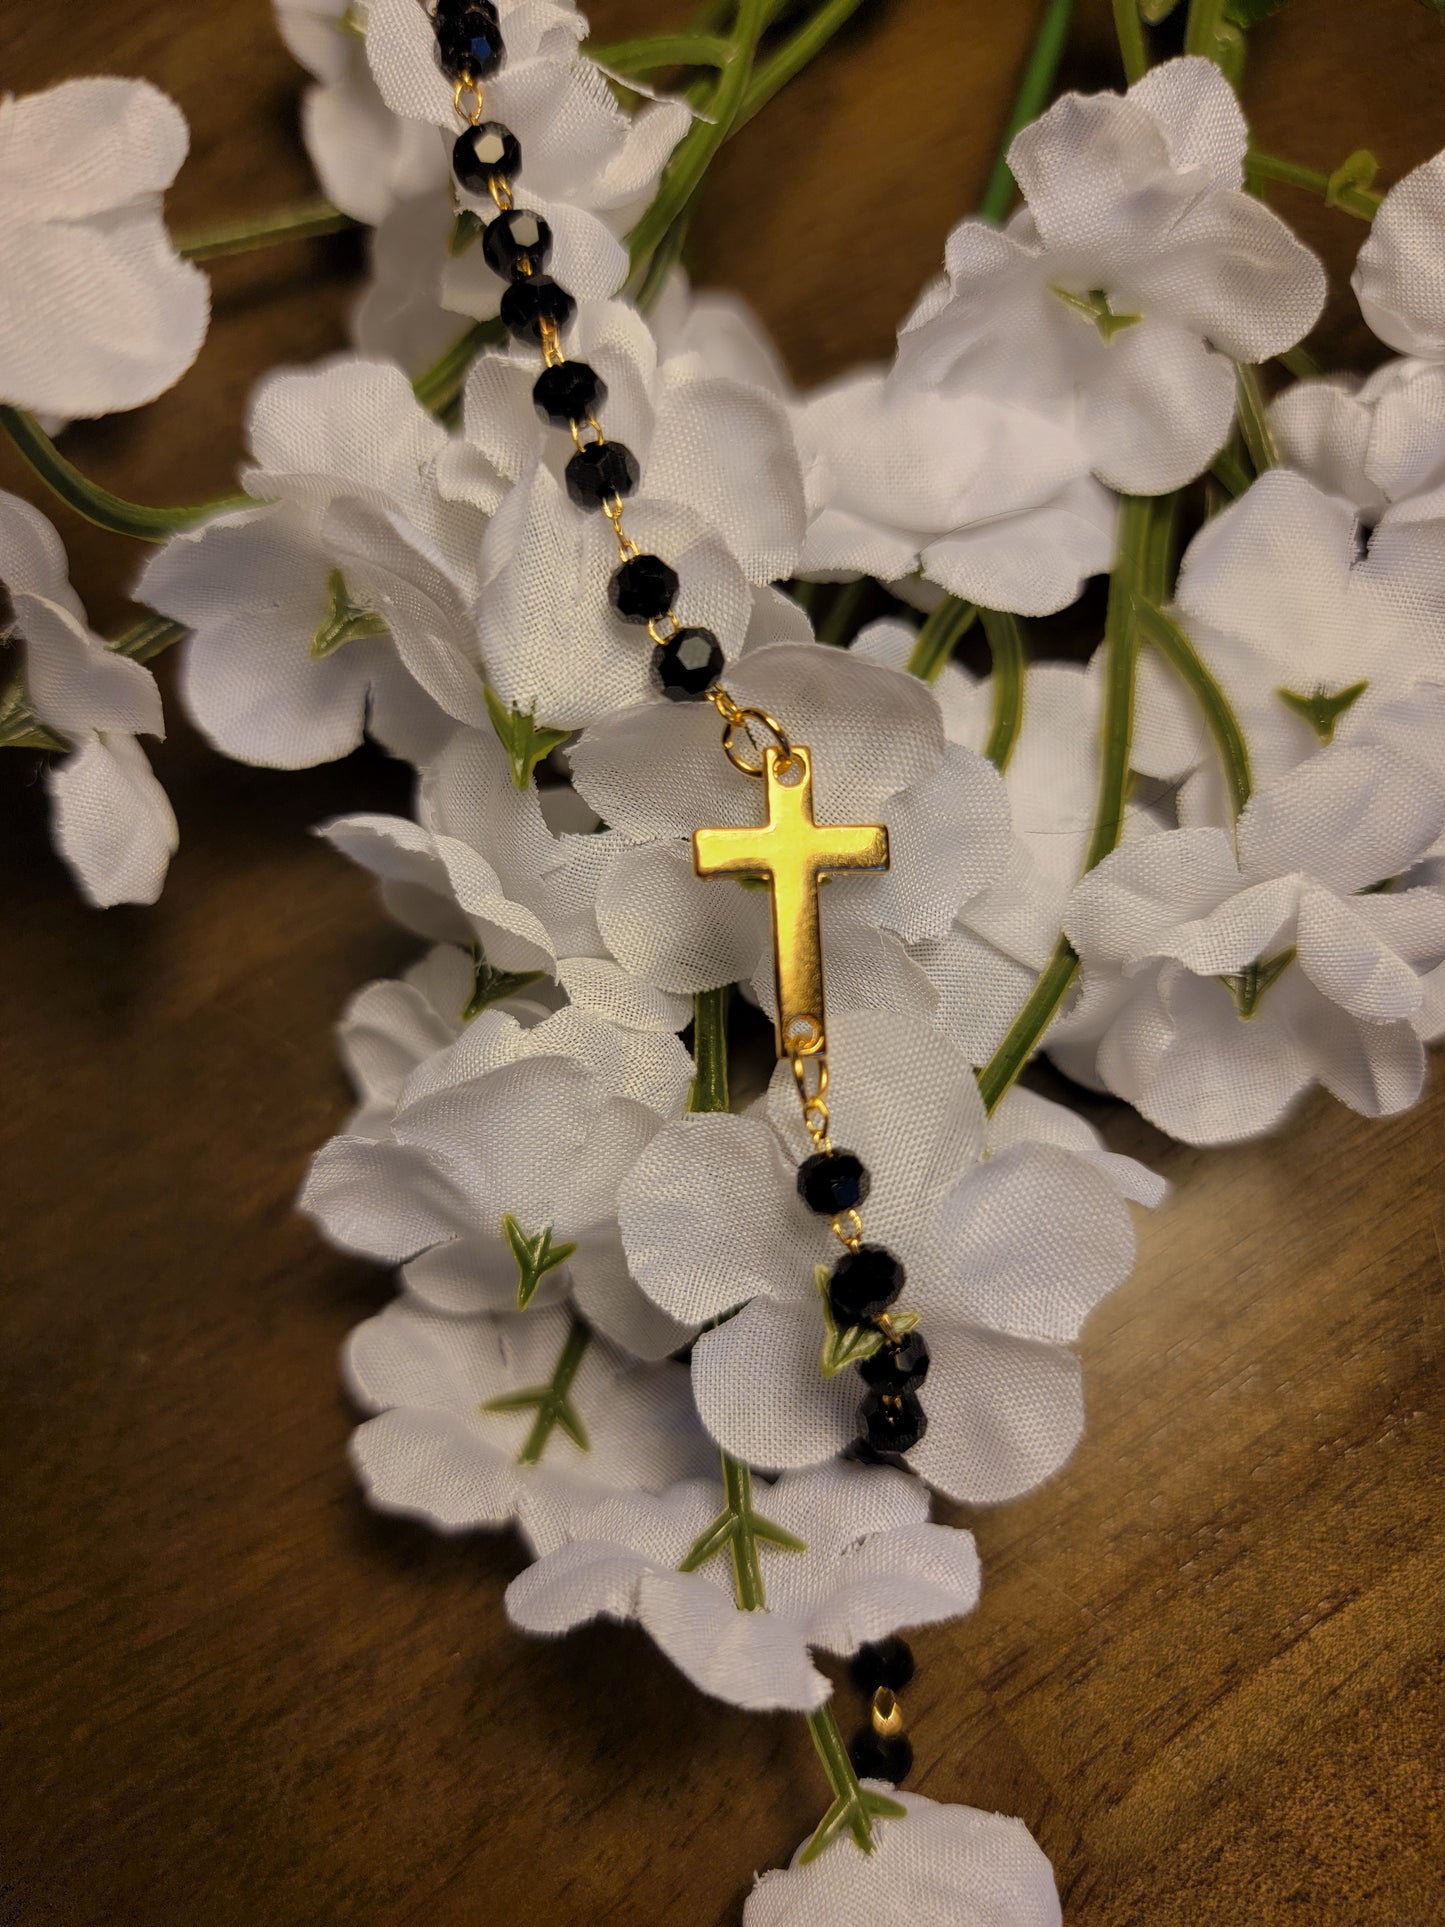 Gold Bracelet with Black Beads and Cross